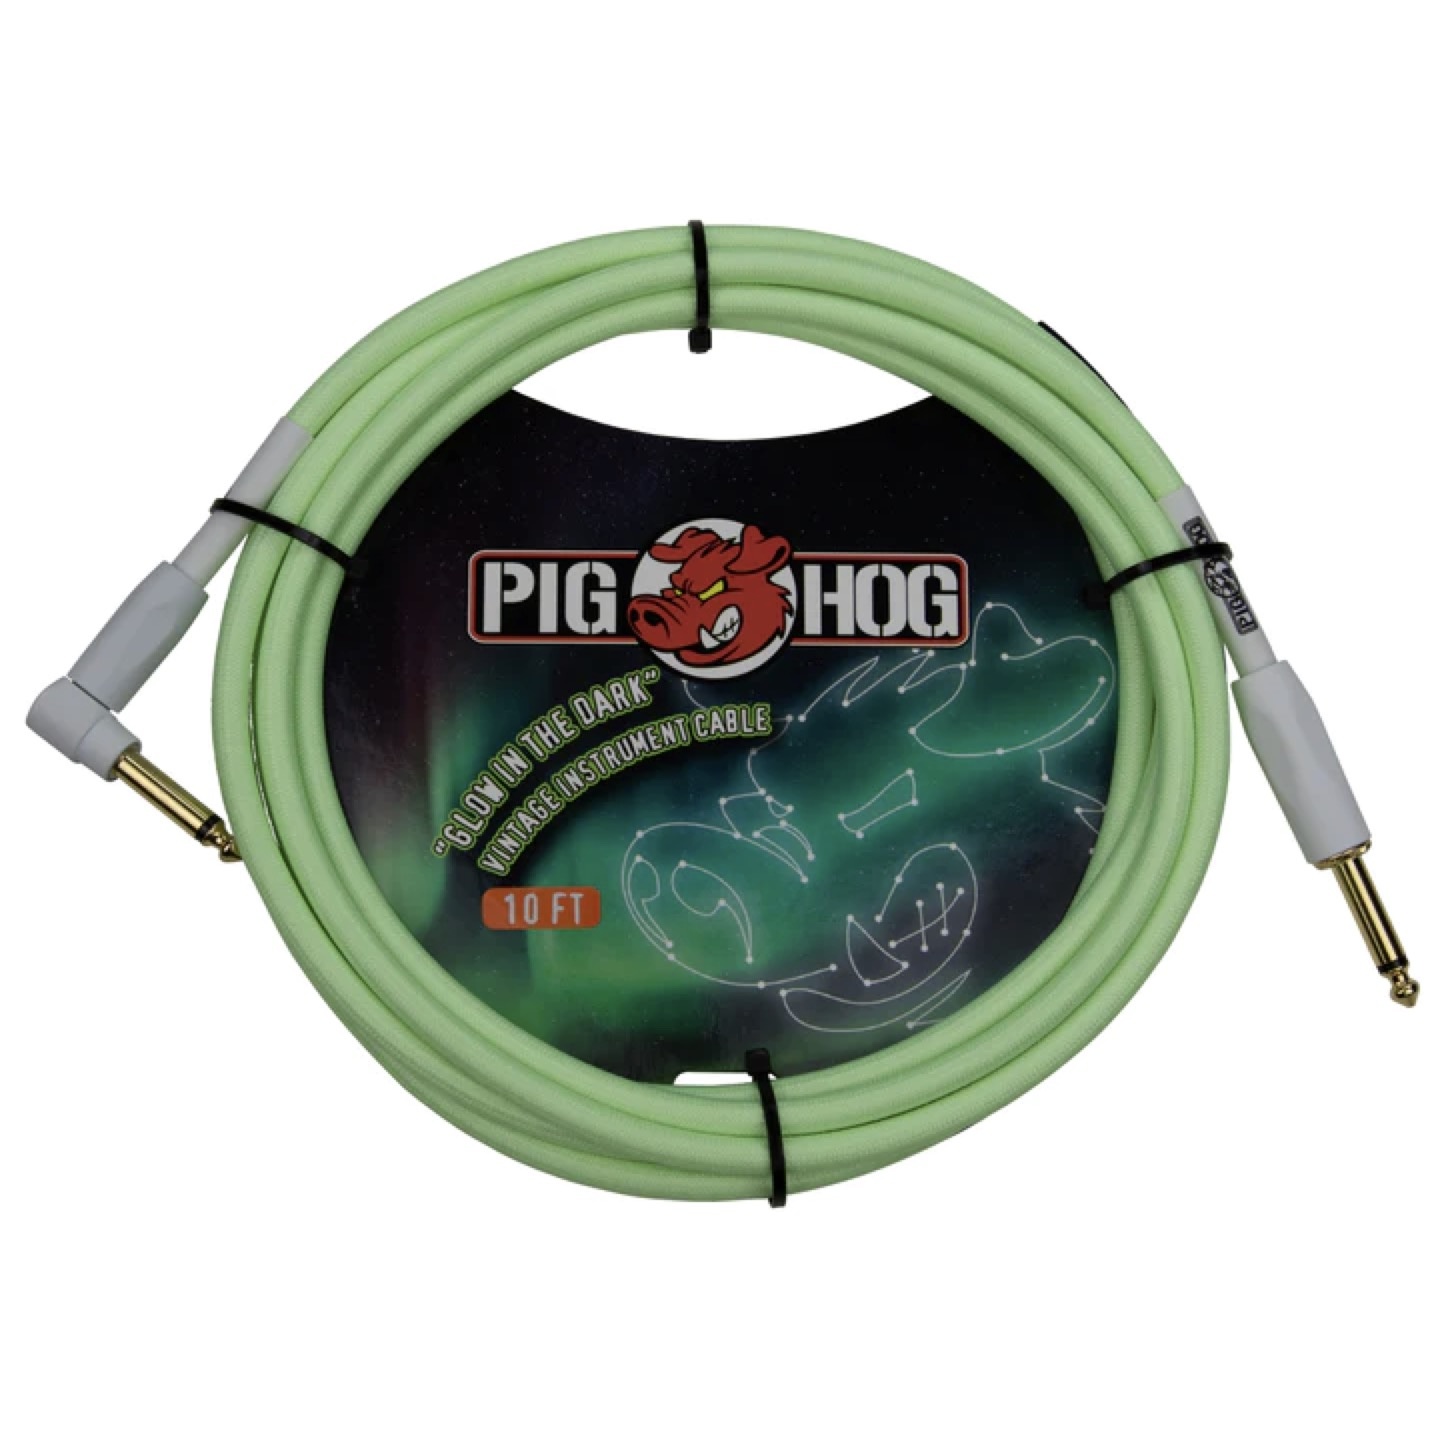 Pig Hog Glow-in-the-Dark Vintage Woven Instrument Cable, 10-foot, Straight-to-Angle, 1/4" Plugs